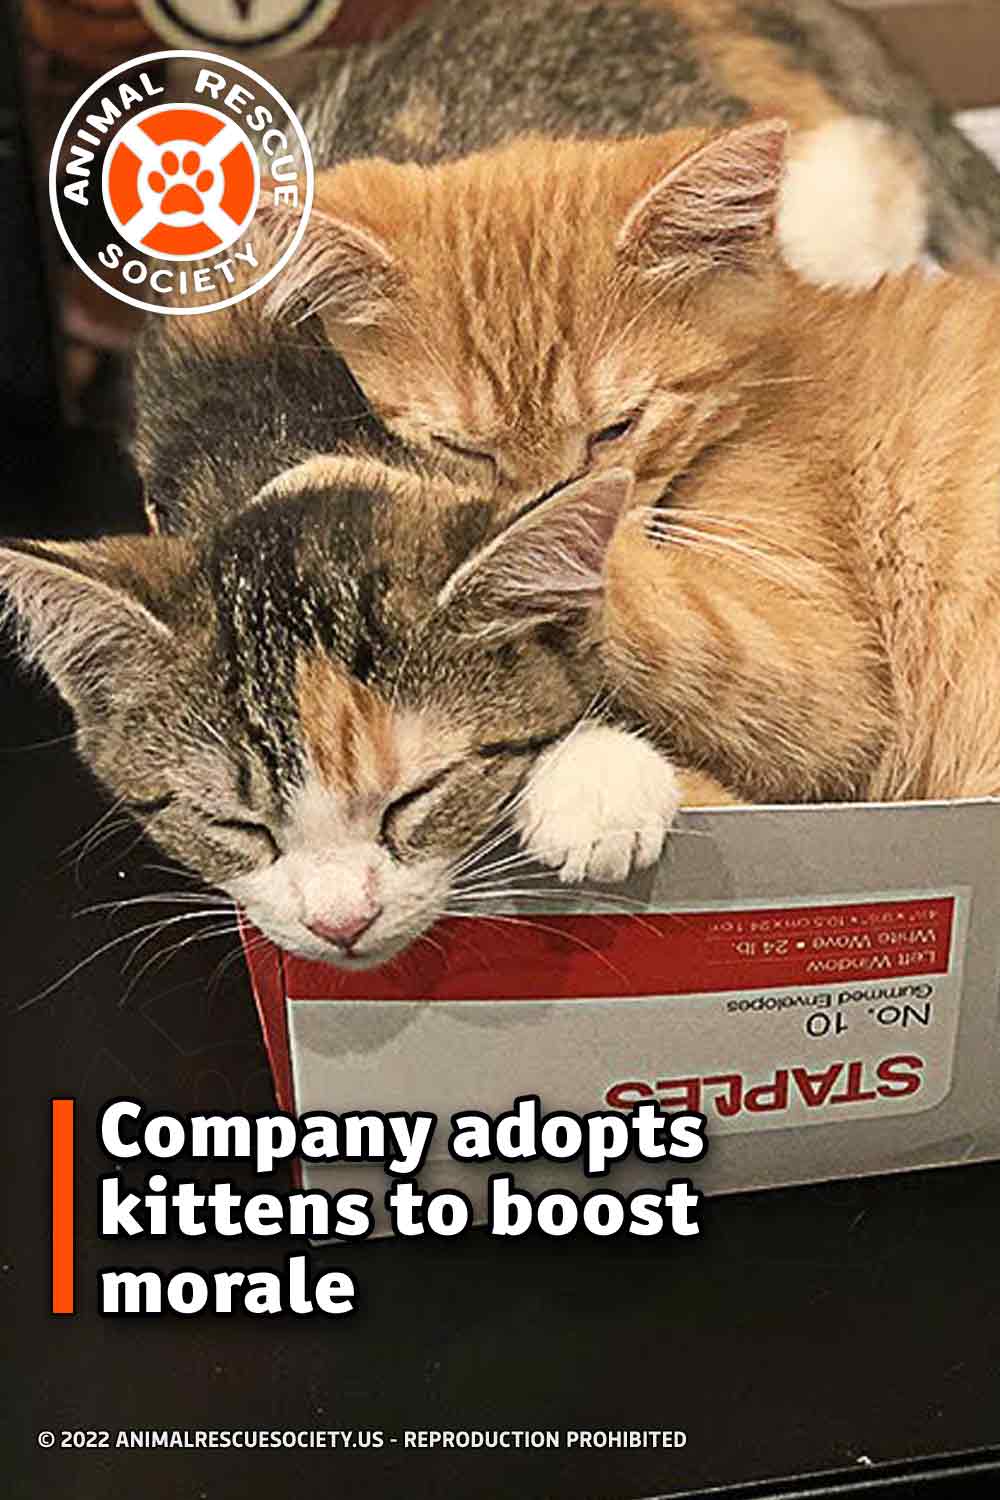 Company adopts kittens to boost morale